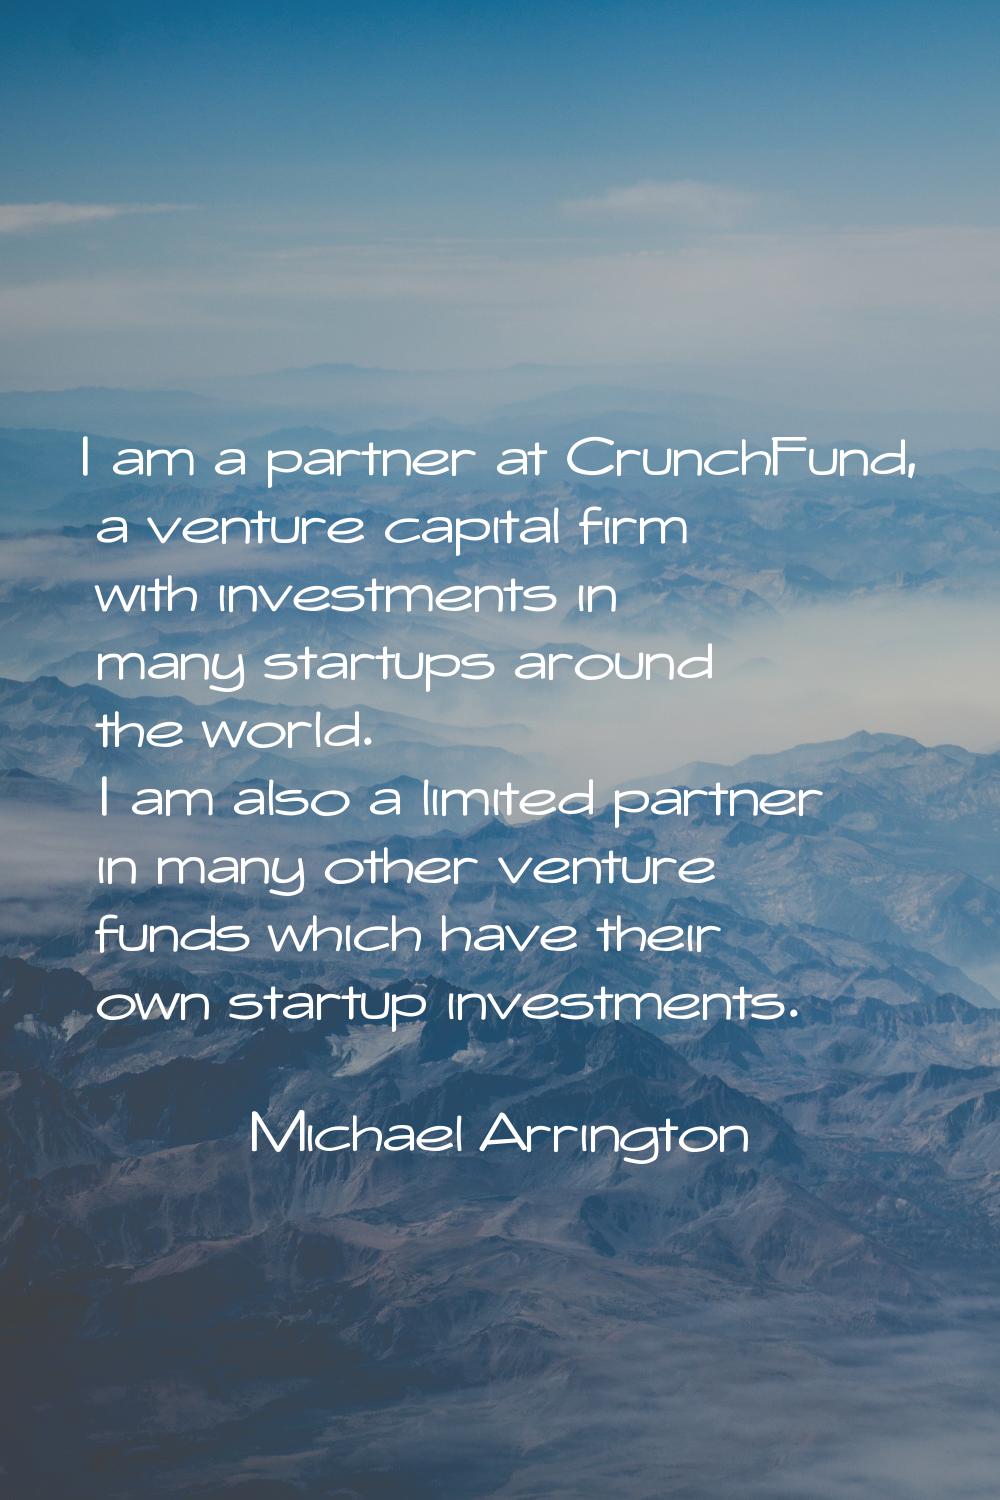 I am a partner at CrunchFund, a venture capital firm with investments in many startups around the w